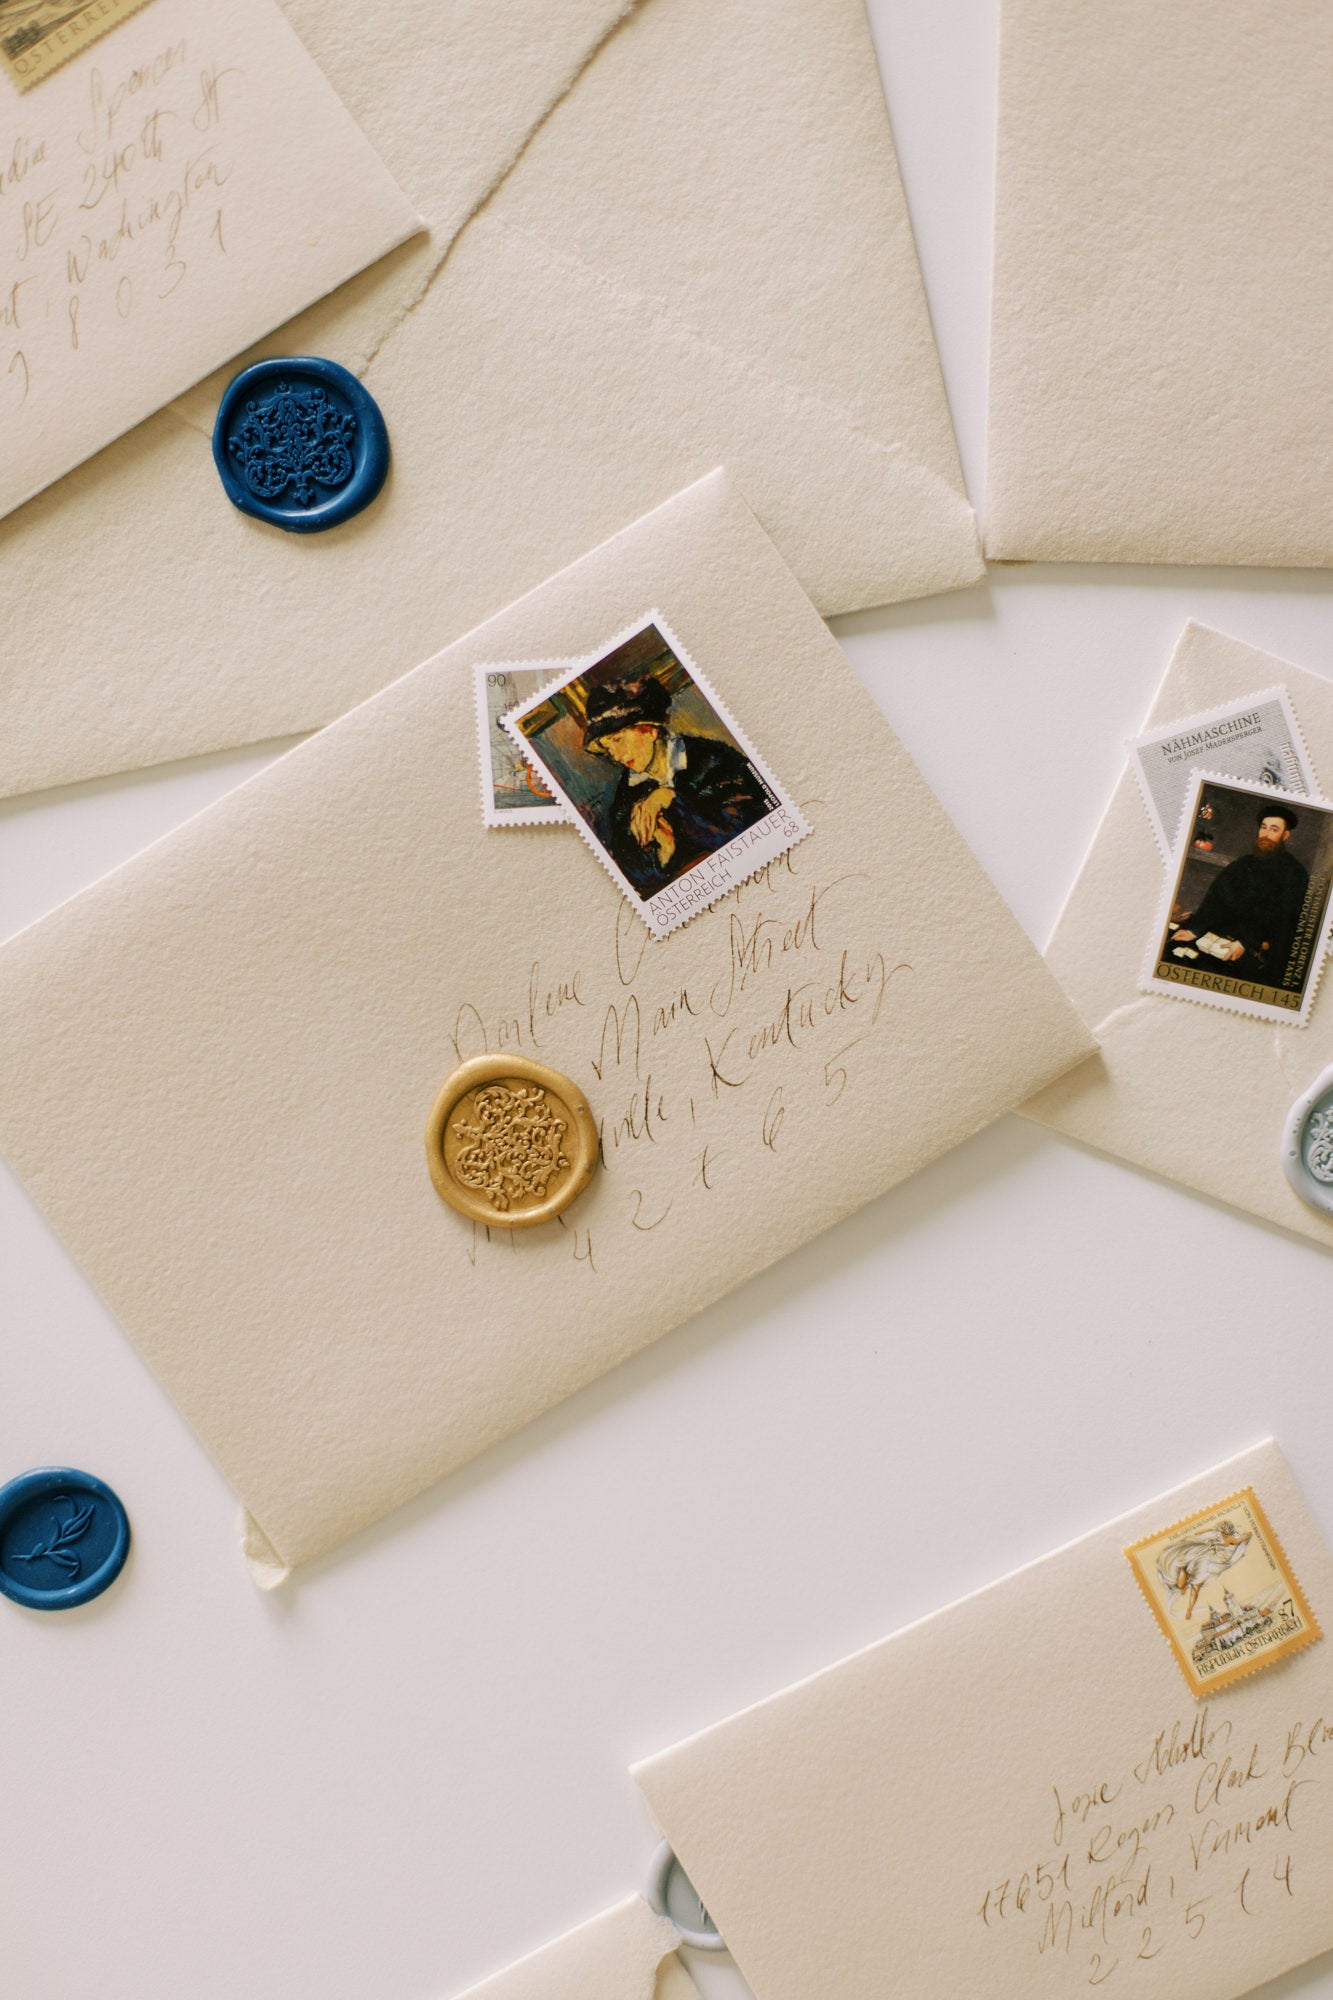 Elevate your mailing experience with hand-canceling postage, safeguarding your stunning handmade paper treasures.